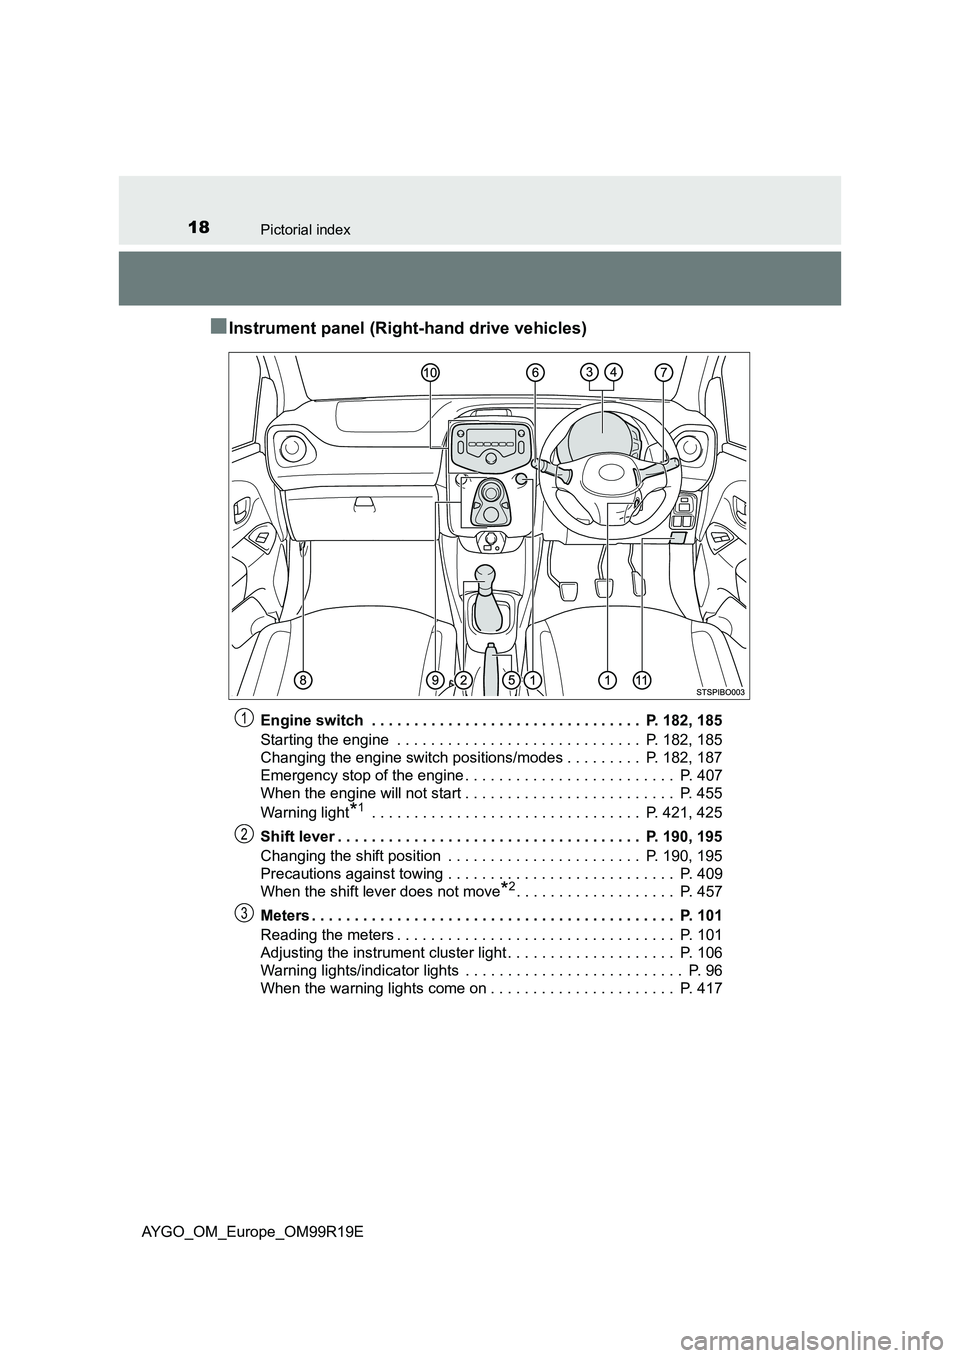 TOYOTA AYGO 2019  Owners Manual (in English) 18Pictorial index
AYGO_OM_Europe_OM99R19E
■Instrument panel (Right-hand drive vehicles)
Engine switch  . . . . . . . . . . . . . . . . . . . . . . . . . . . . . . . .  P. 182, 185 
Starting the engi